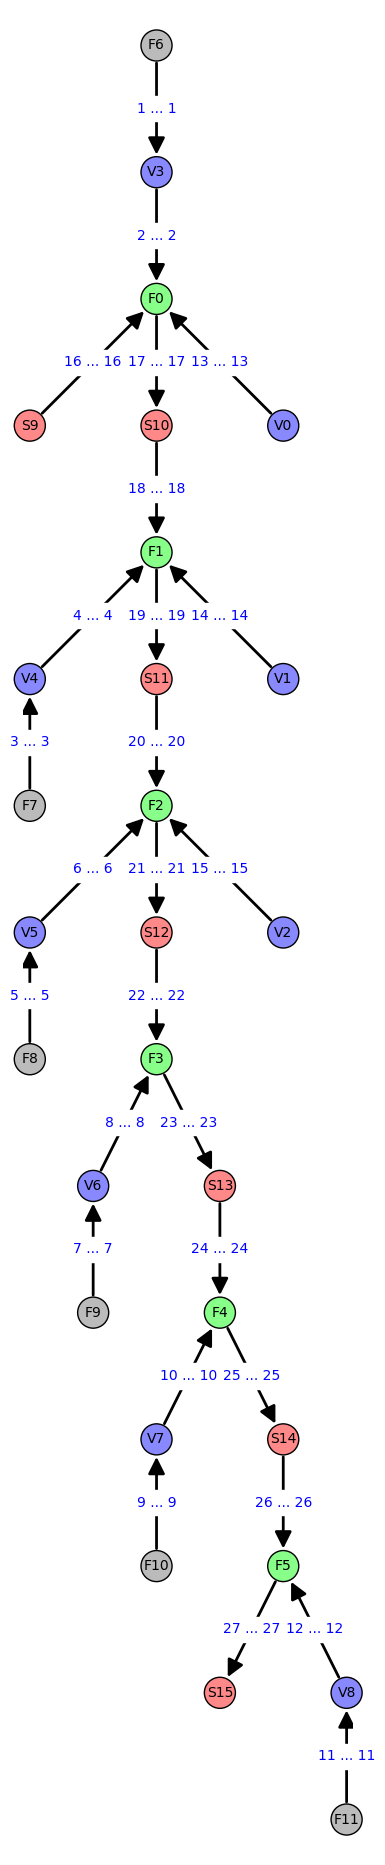 Graph with tree layout and large figsize